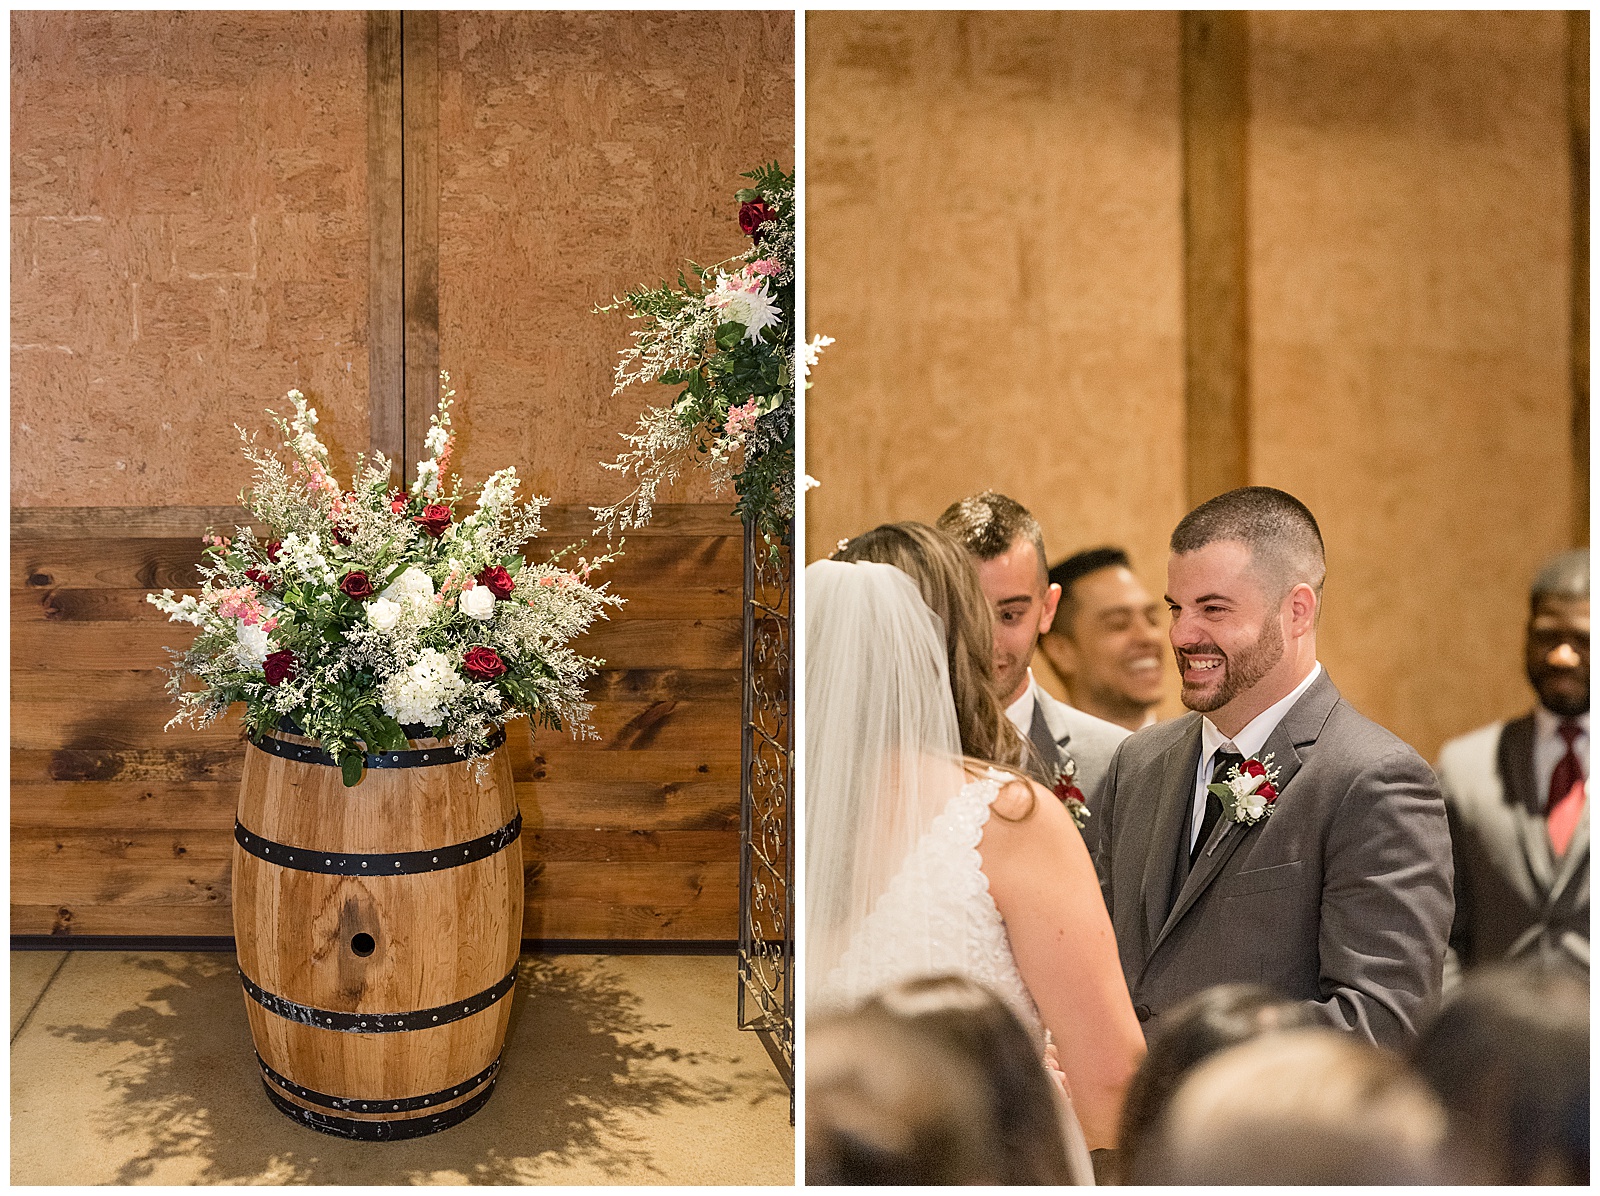 bride and groom smiling during indoor fall wedding ceremony in beautifully decorated room